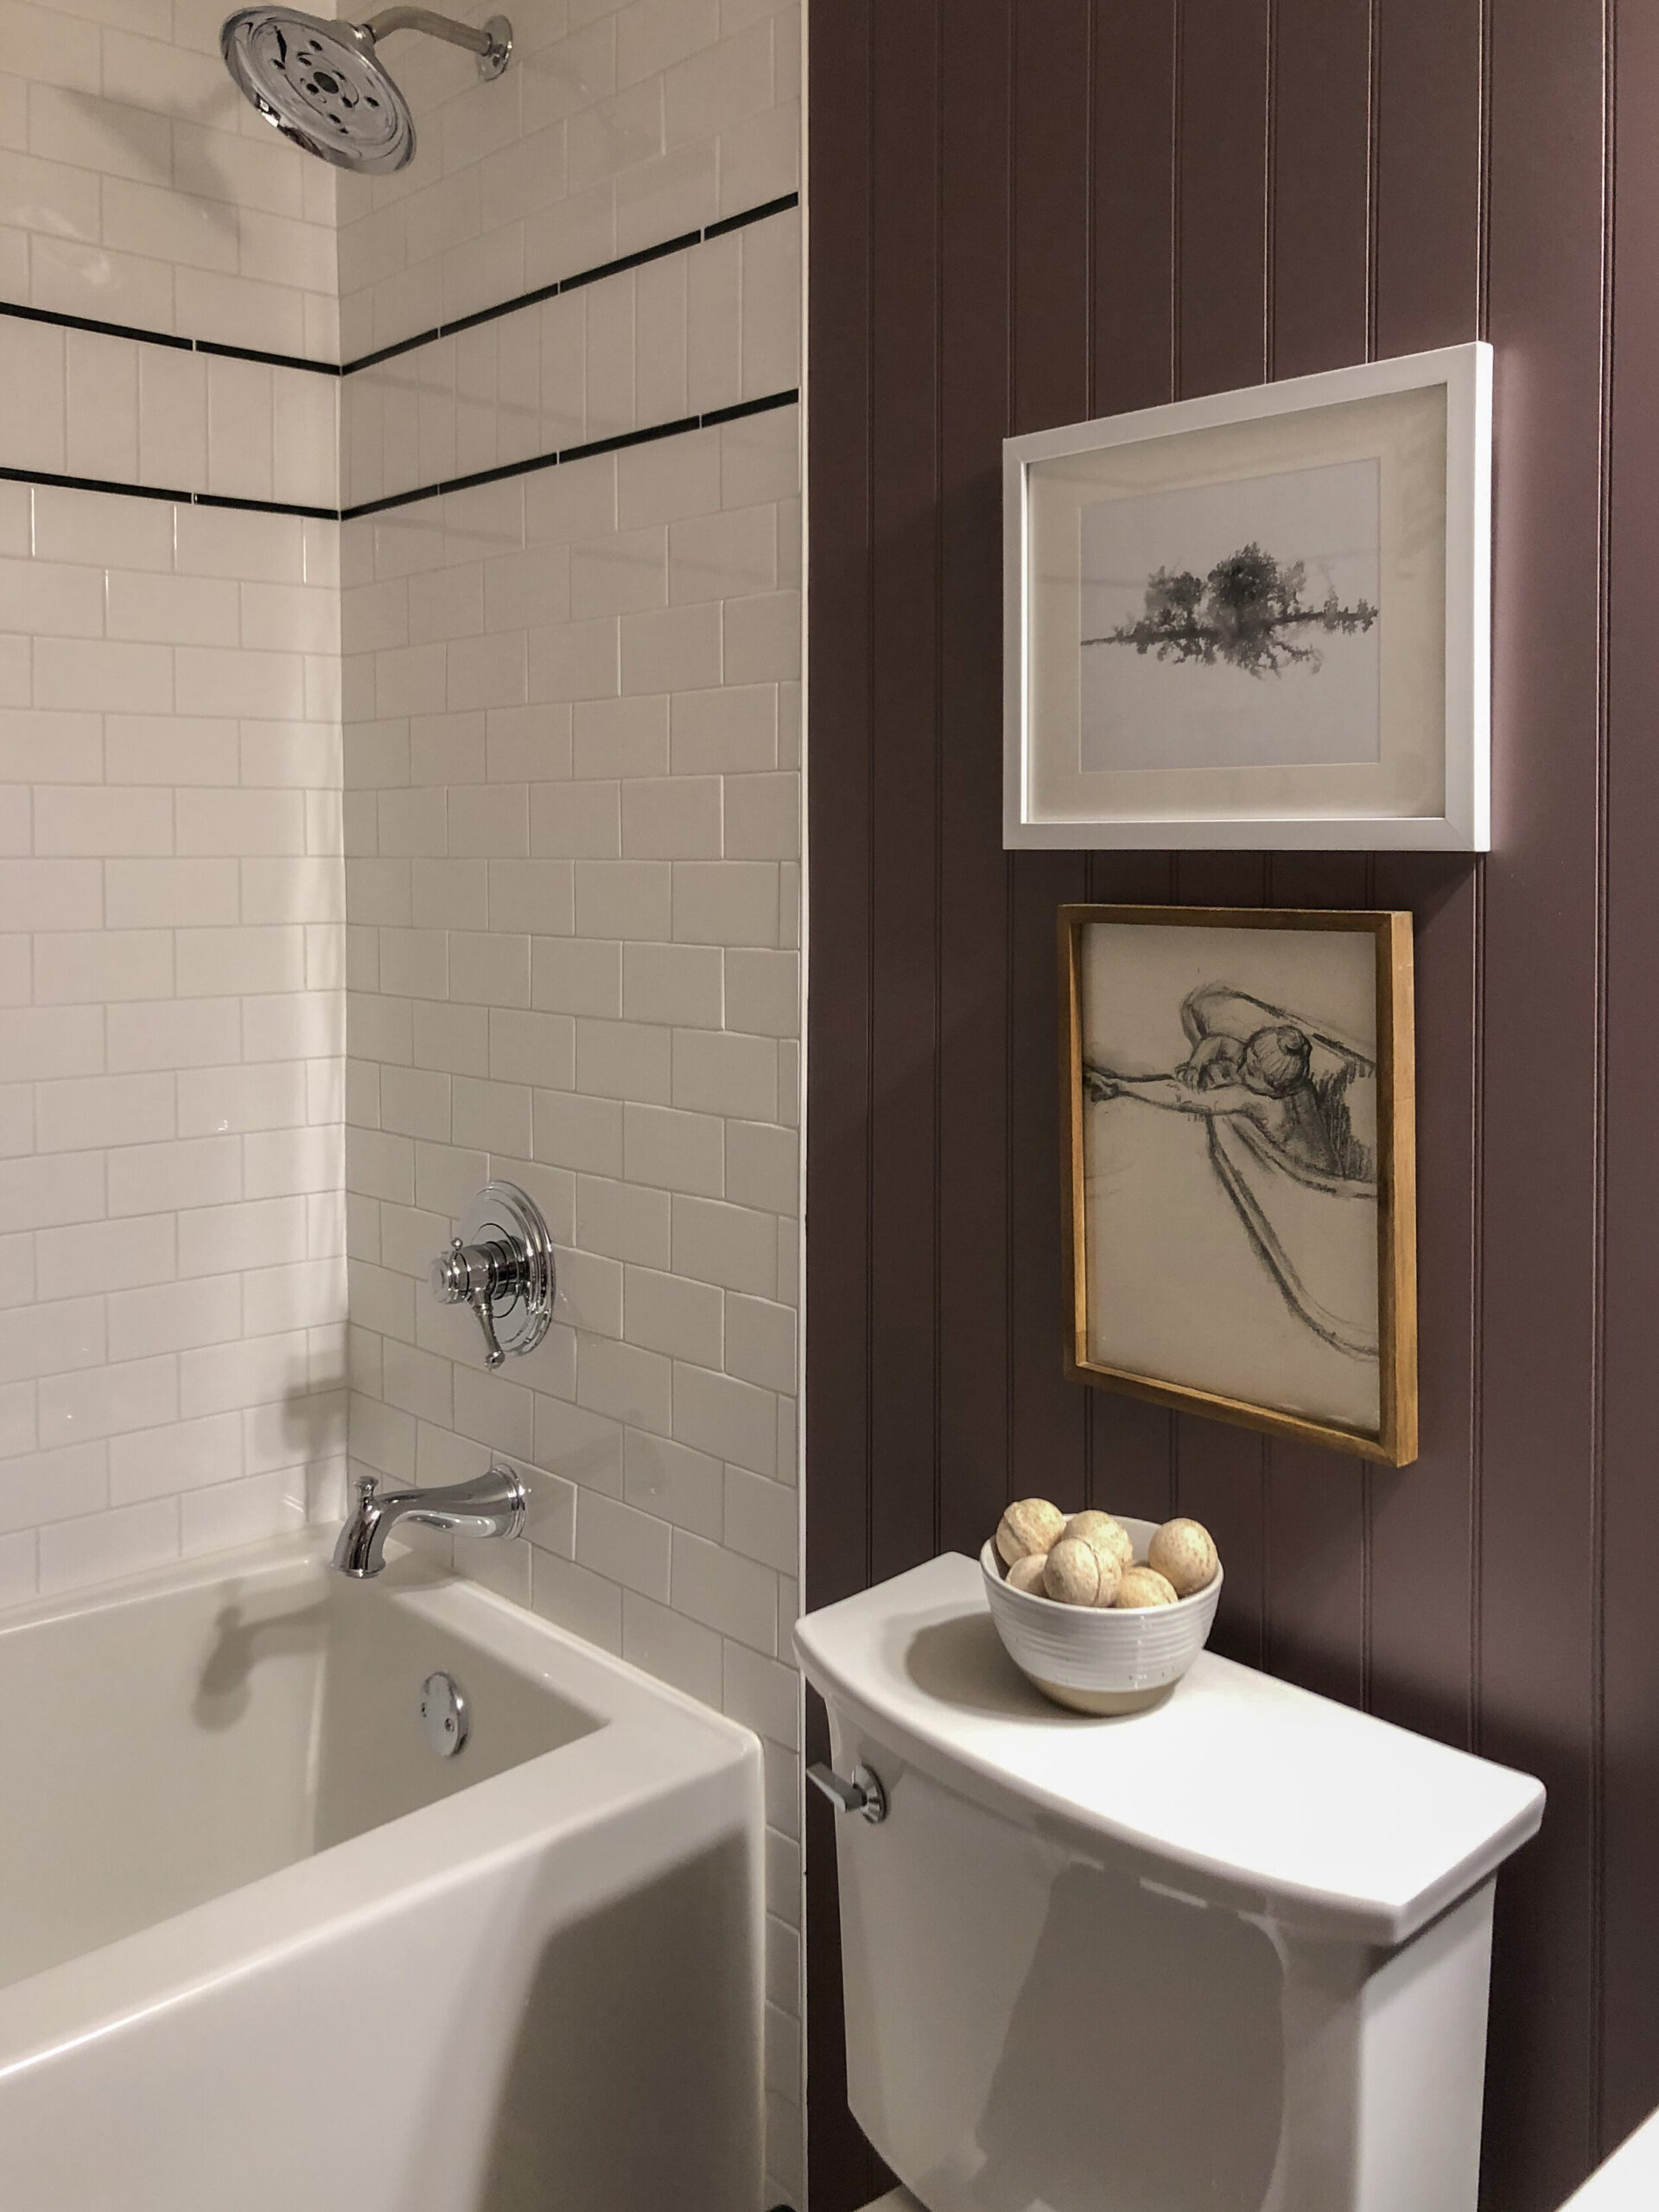 bathroom with new tub, white subway tile with black accents, purple beadboard walls and art stacked over toilet